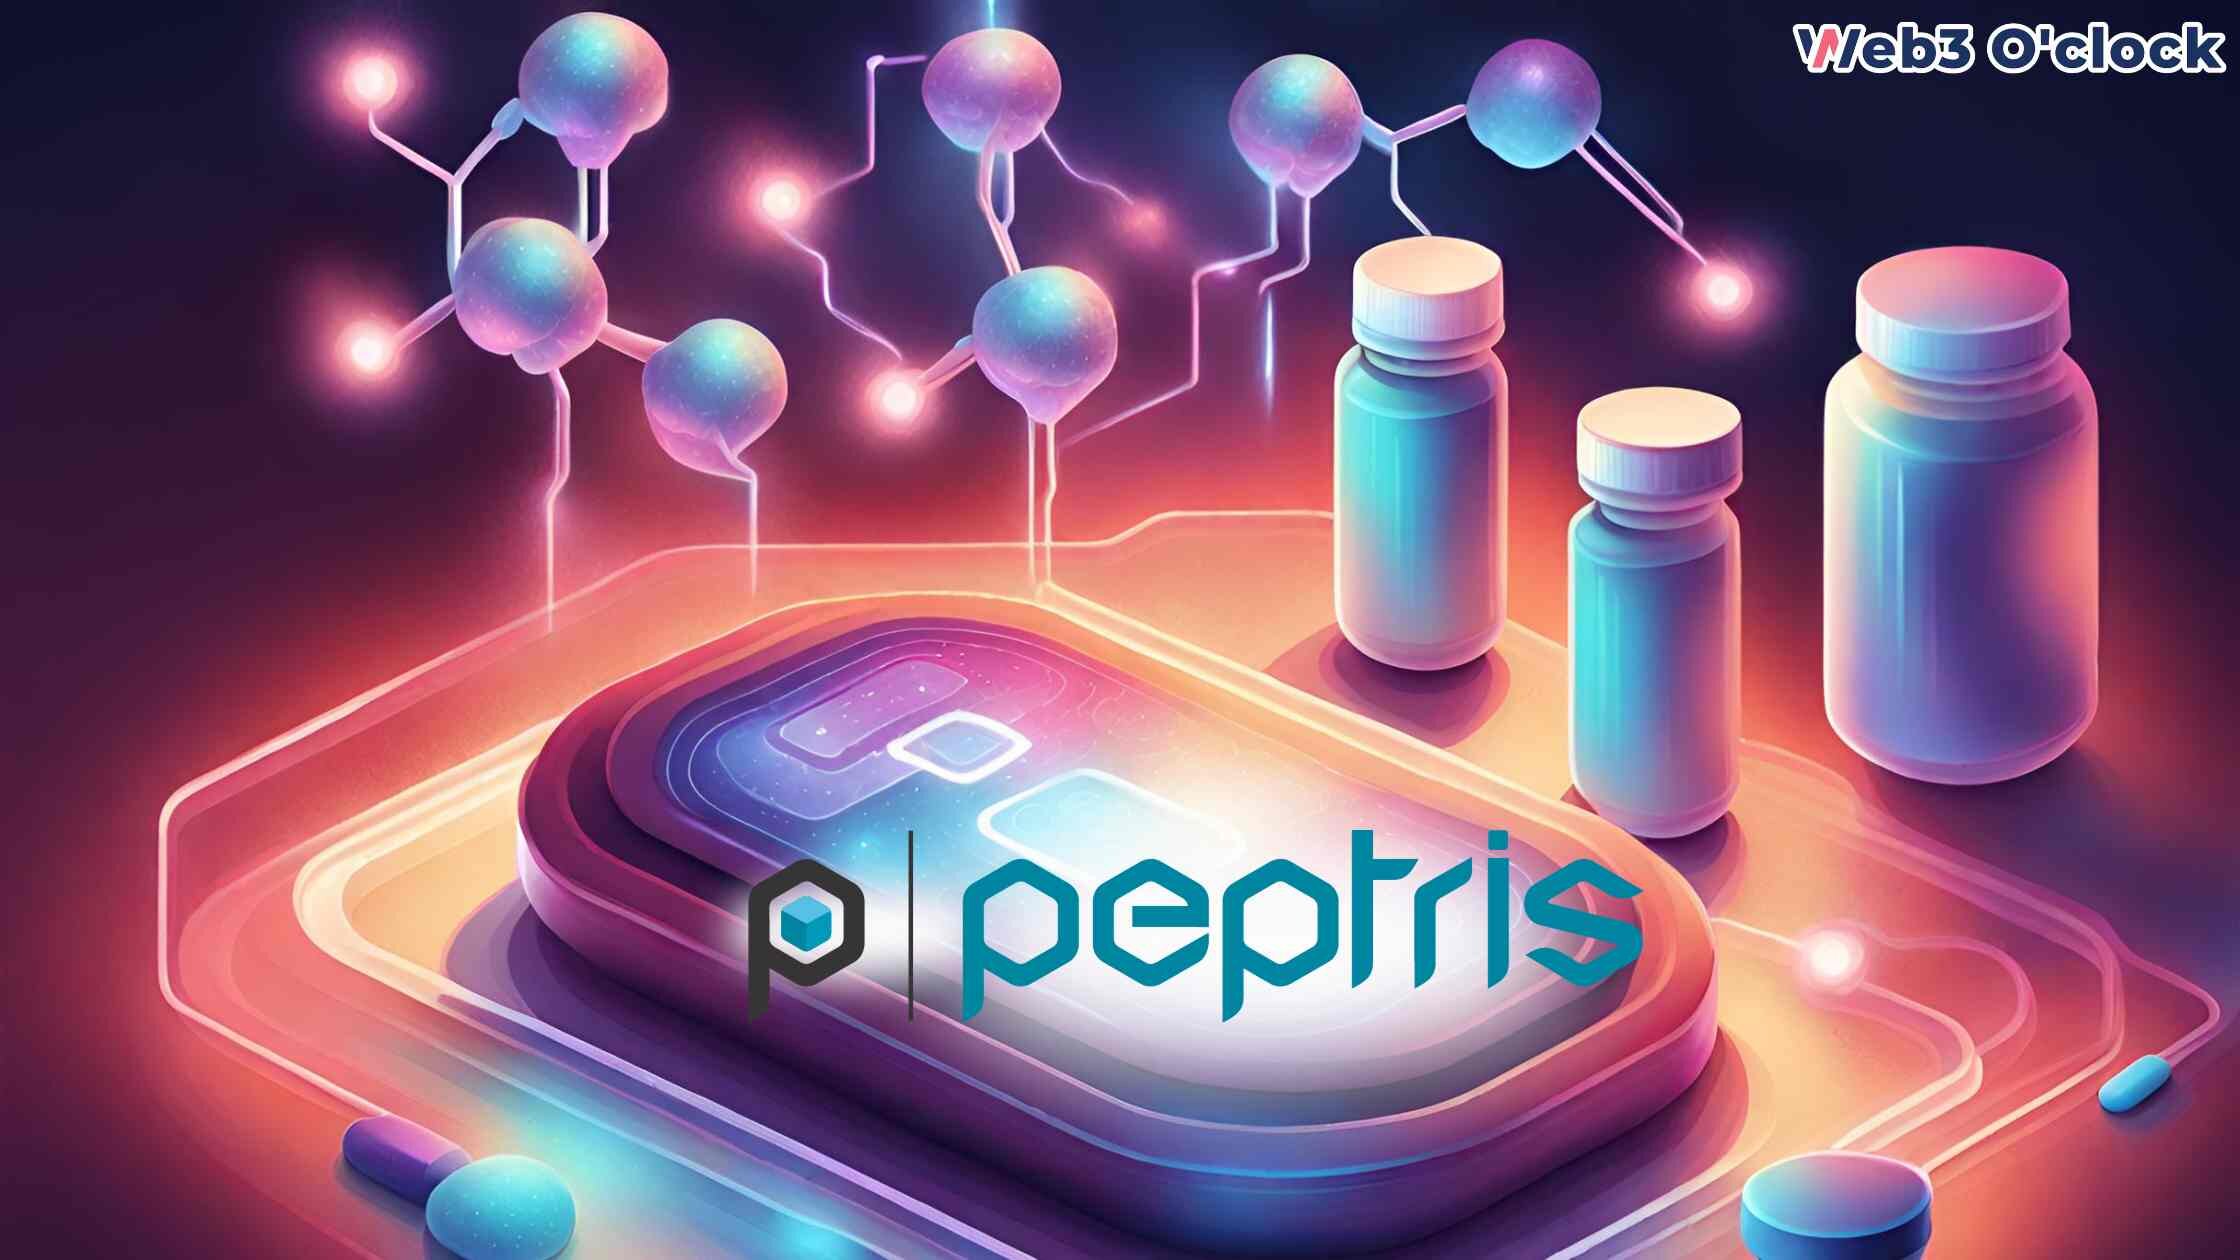 Peptris Secures $1M Funding by Web3 o'clock